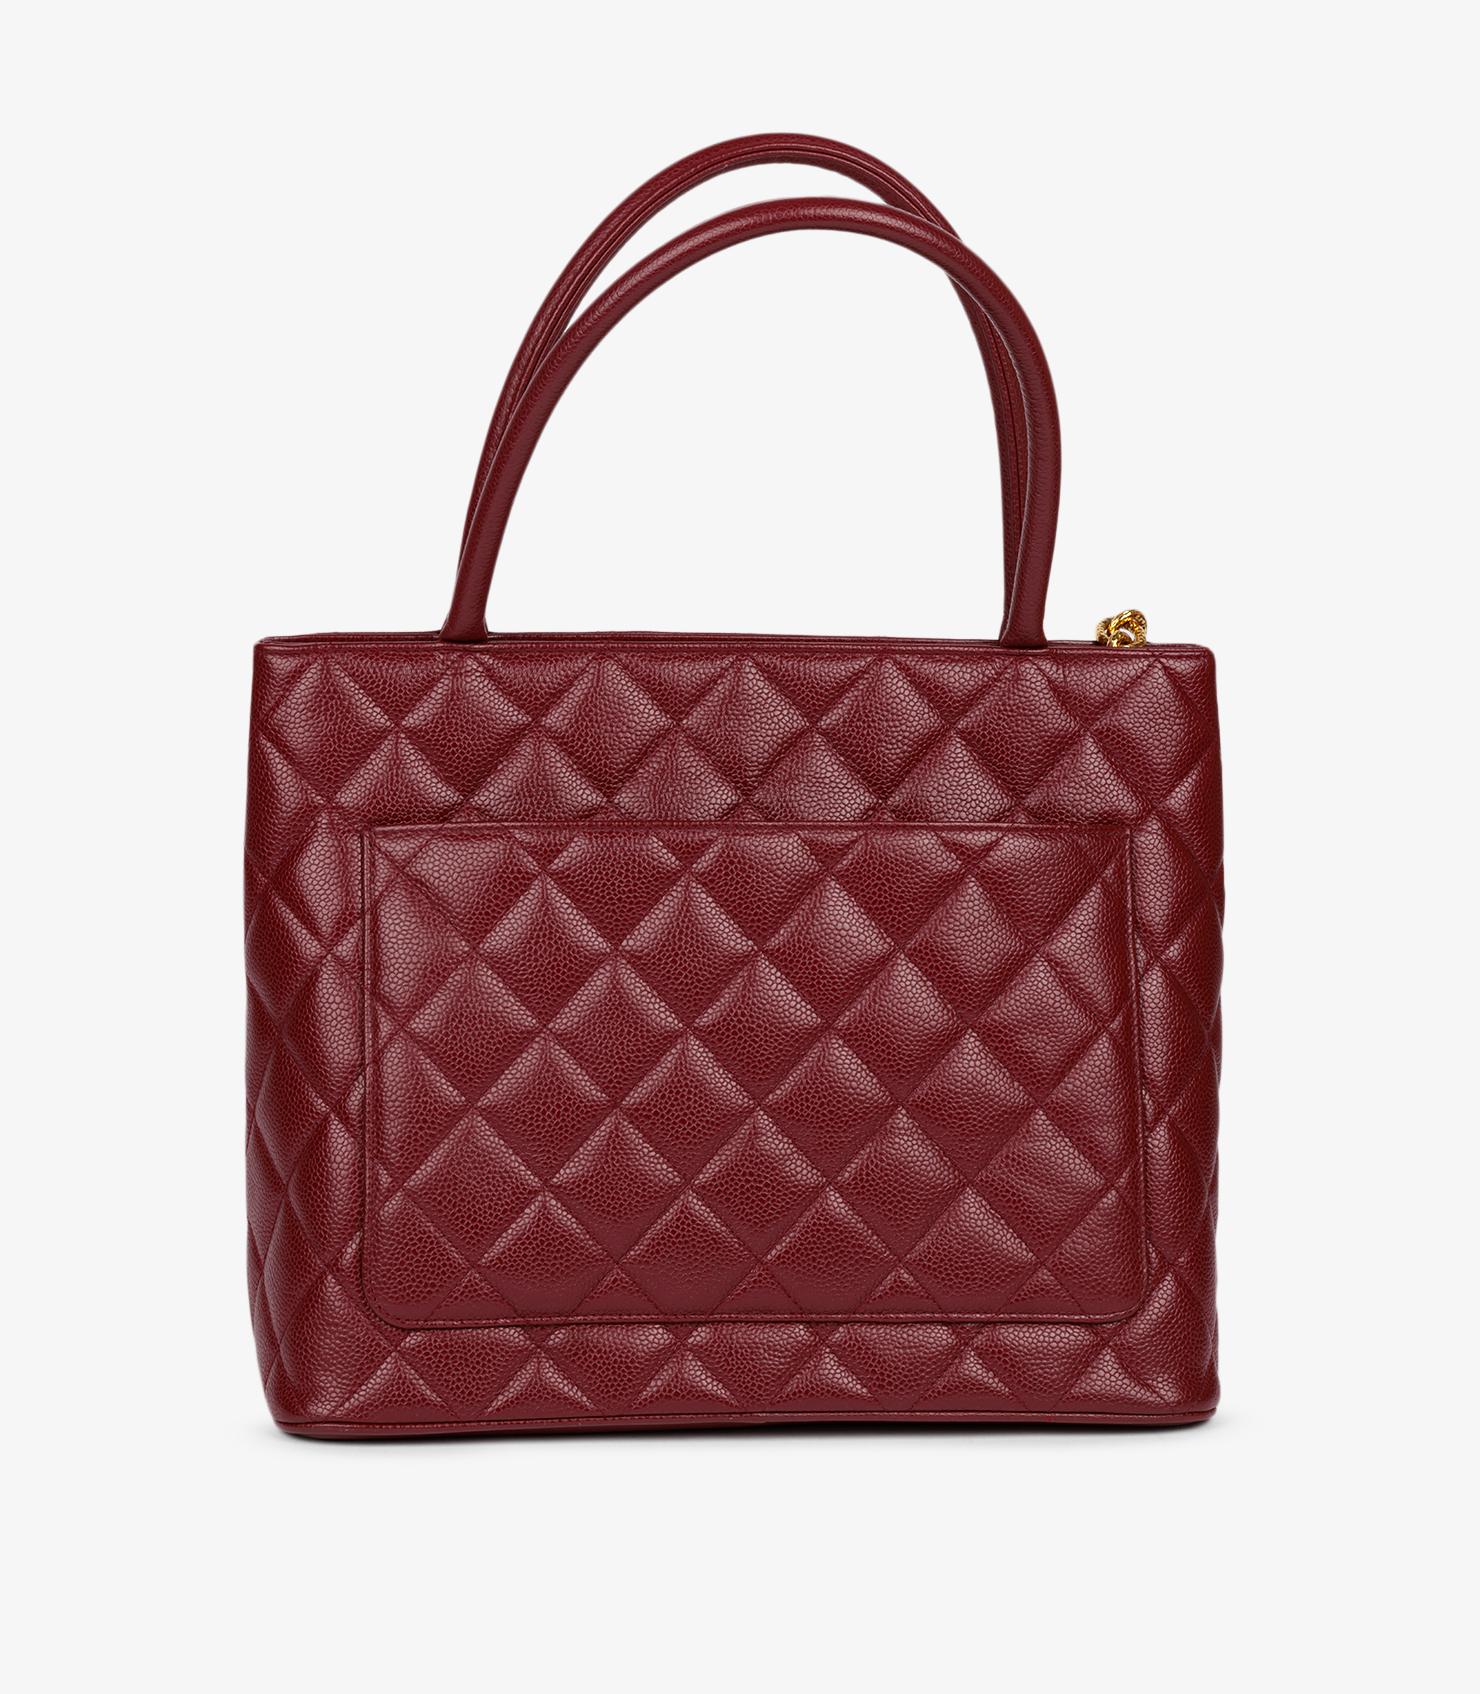 Chanel Burgundy Quilted Caviar Leather Vintage Medallion Tote

Brand- Chanel
Model- Medallion Tote
Product Type- Tote
Serial Number- 54*****
Age- Circa 1997
Accompanied By- Care Booklet, Authenticity Card
Colour- Burgundy
Hardware- Gold
Material(s)-